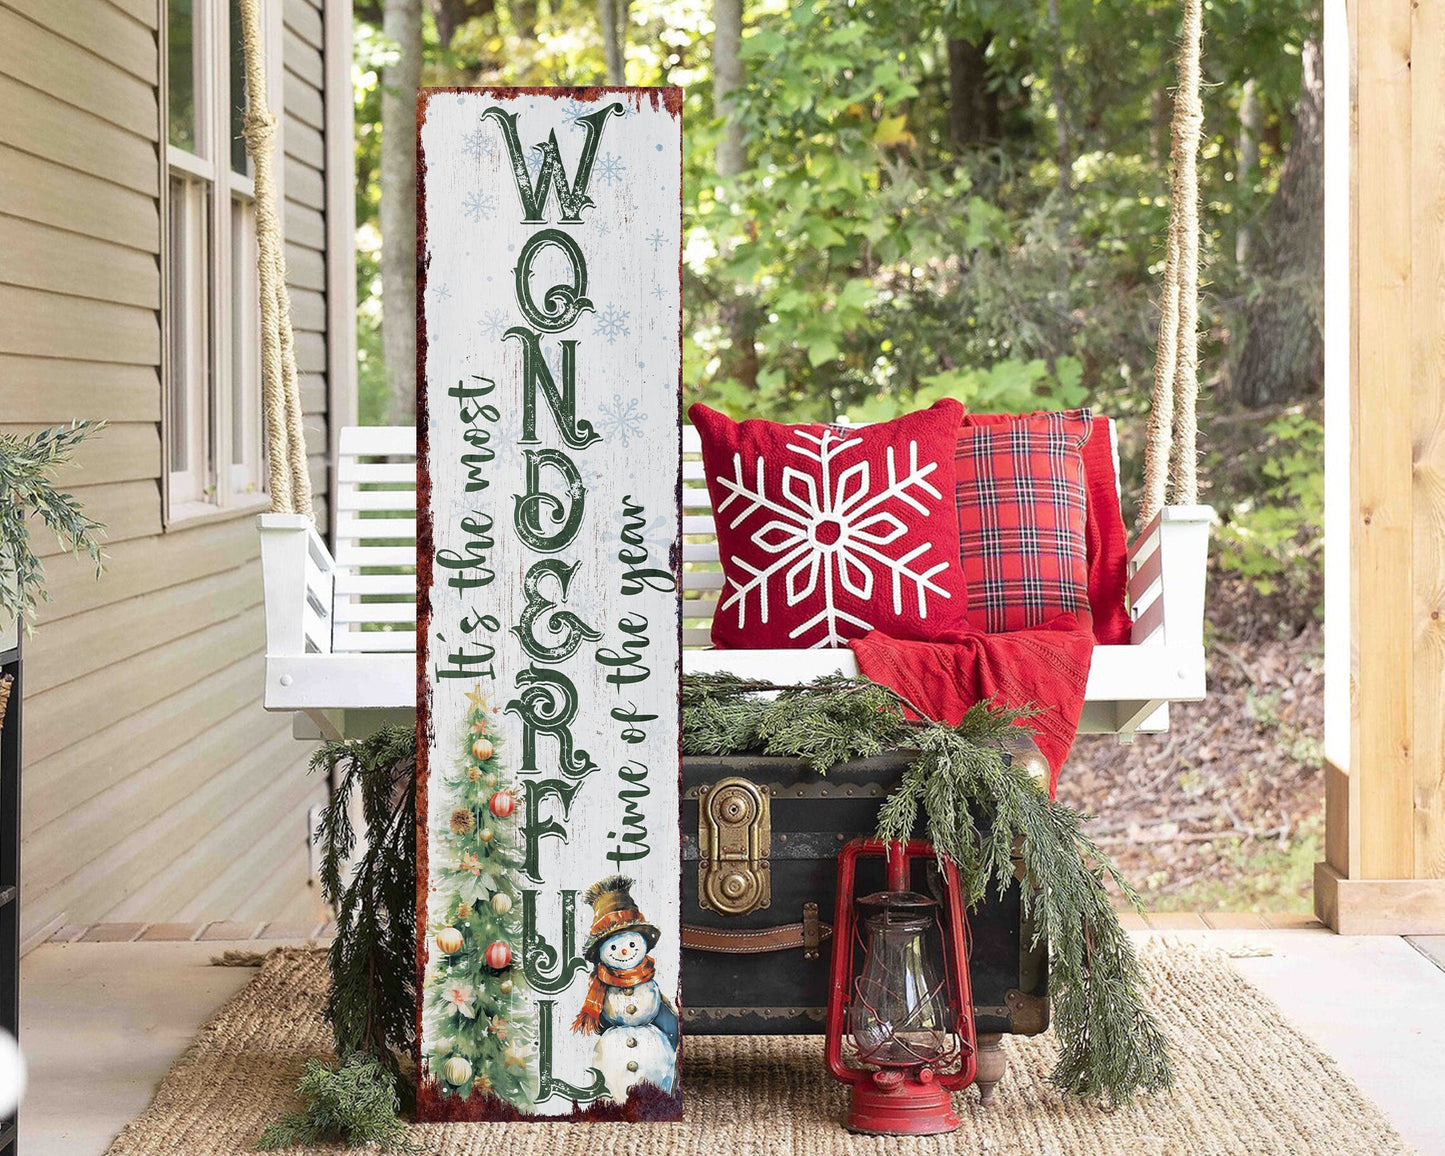 36in "It's The Most Wonderful Time of The Year" Christmas Porch Sign - Front Porch Christmas Welcome Sign, Rustic Farmhouse Entryway Board